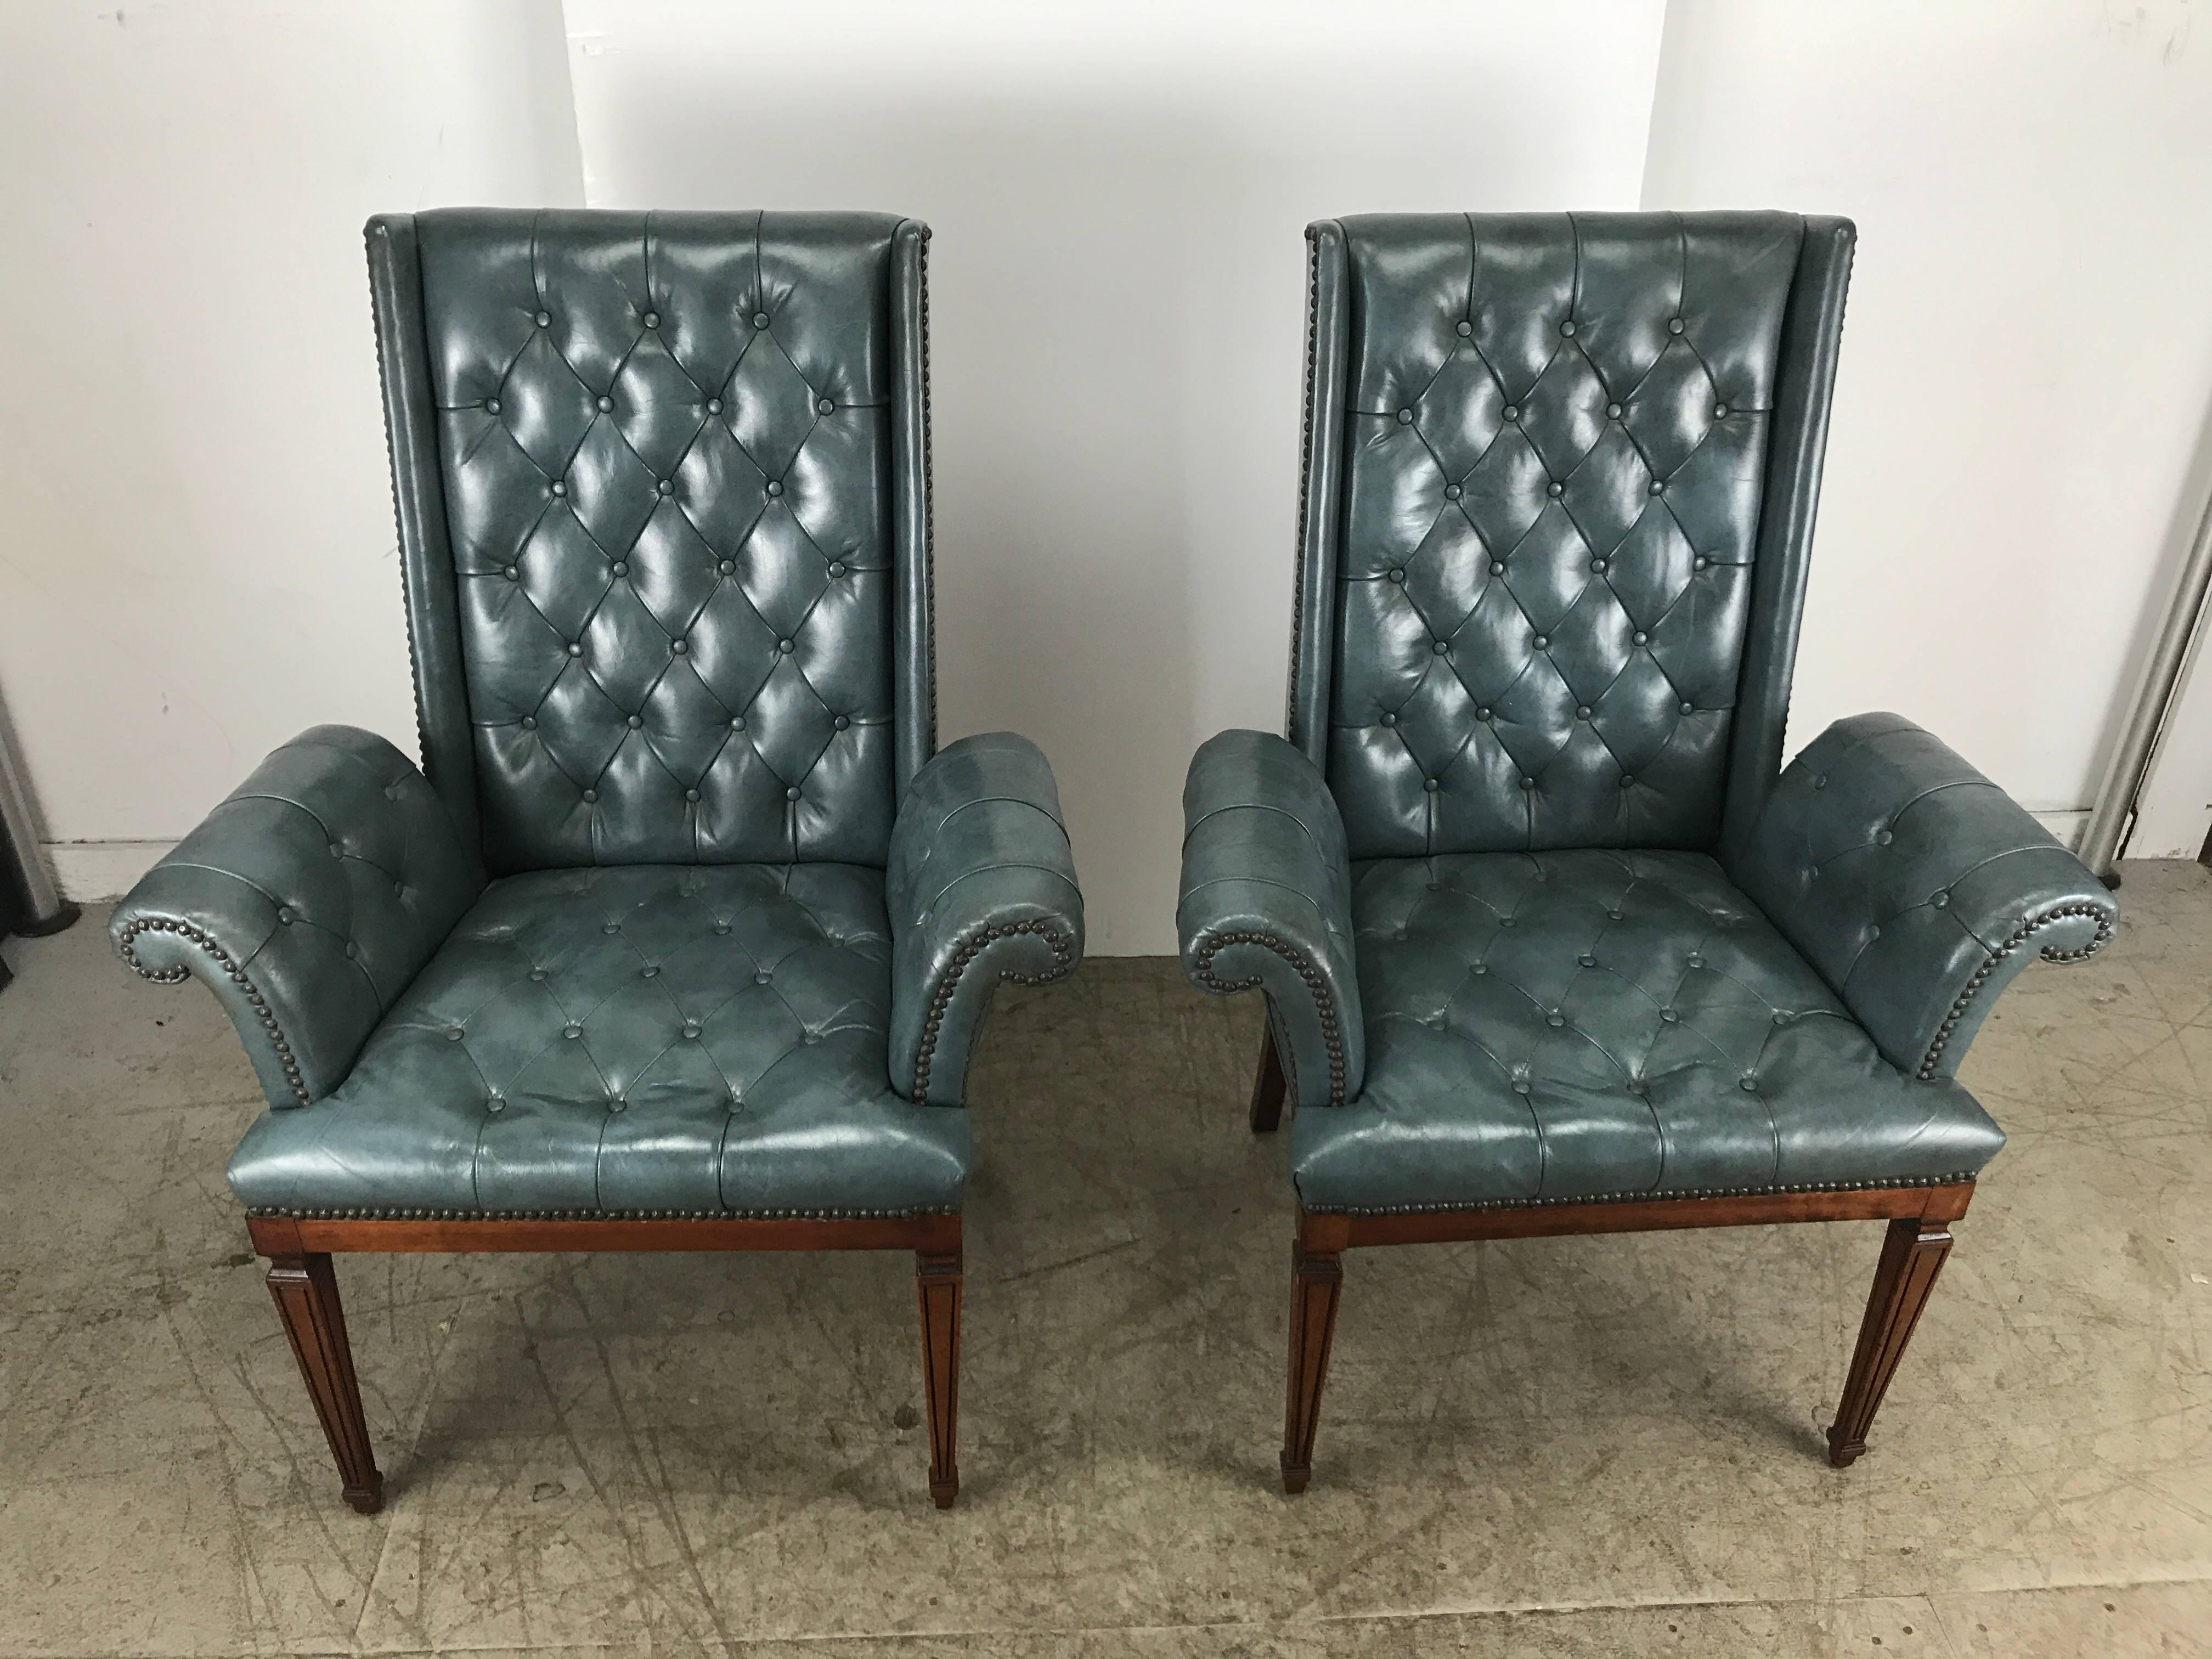 Hollywood Regency Stunning Blue Leather Button Tufted Regency Armchairs, Tommi Parzinger